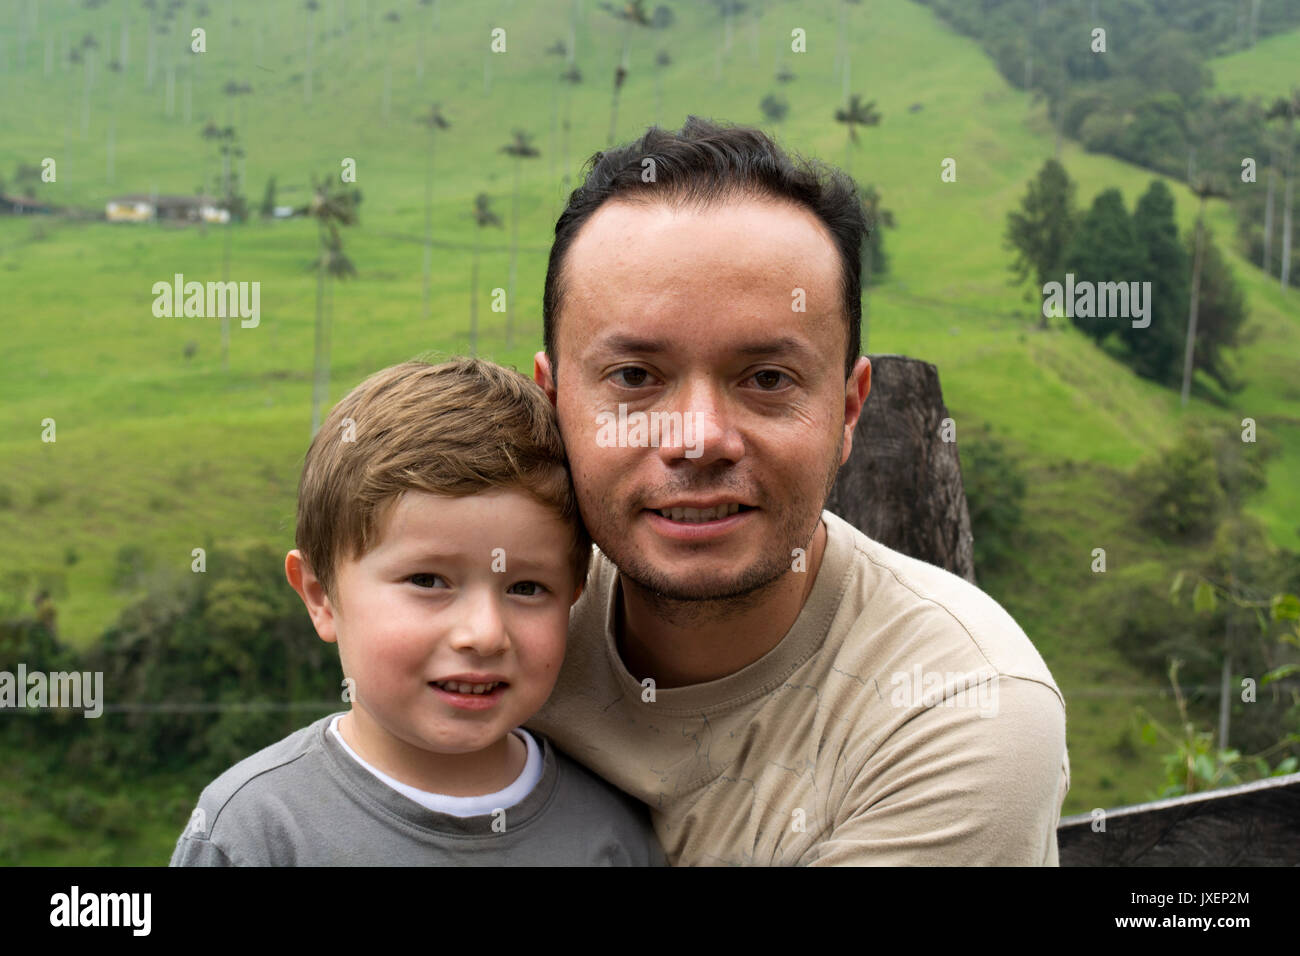 Good looking single, parent father and boy. Stock Photo